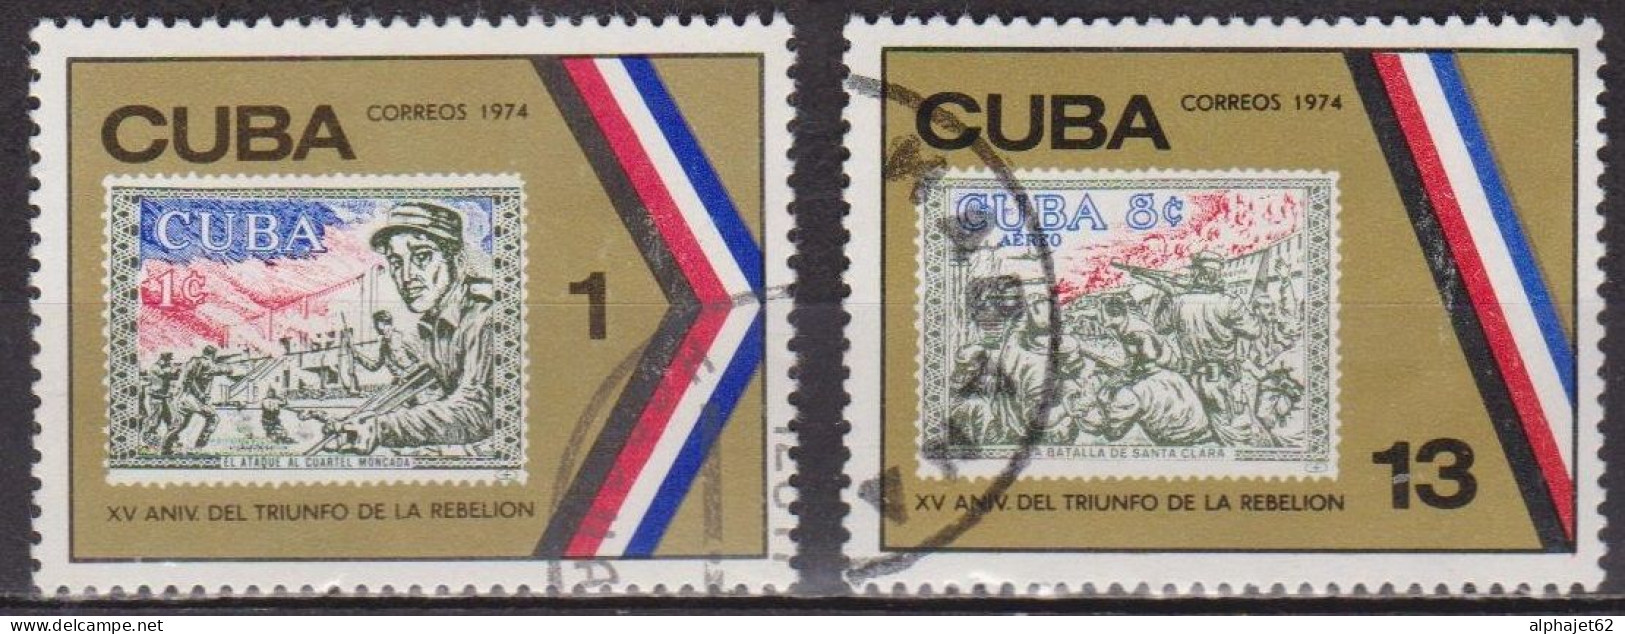 Révolution - CUBA - Timbres Sur Timbres - N° 1729-1731 - 1974 - Used Stamps